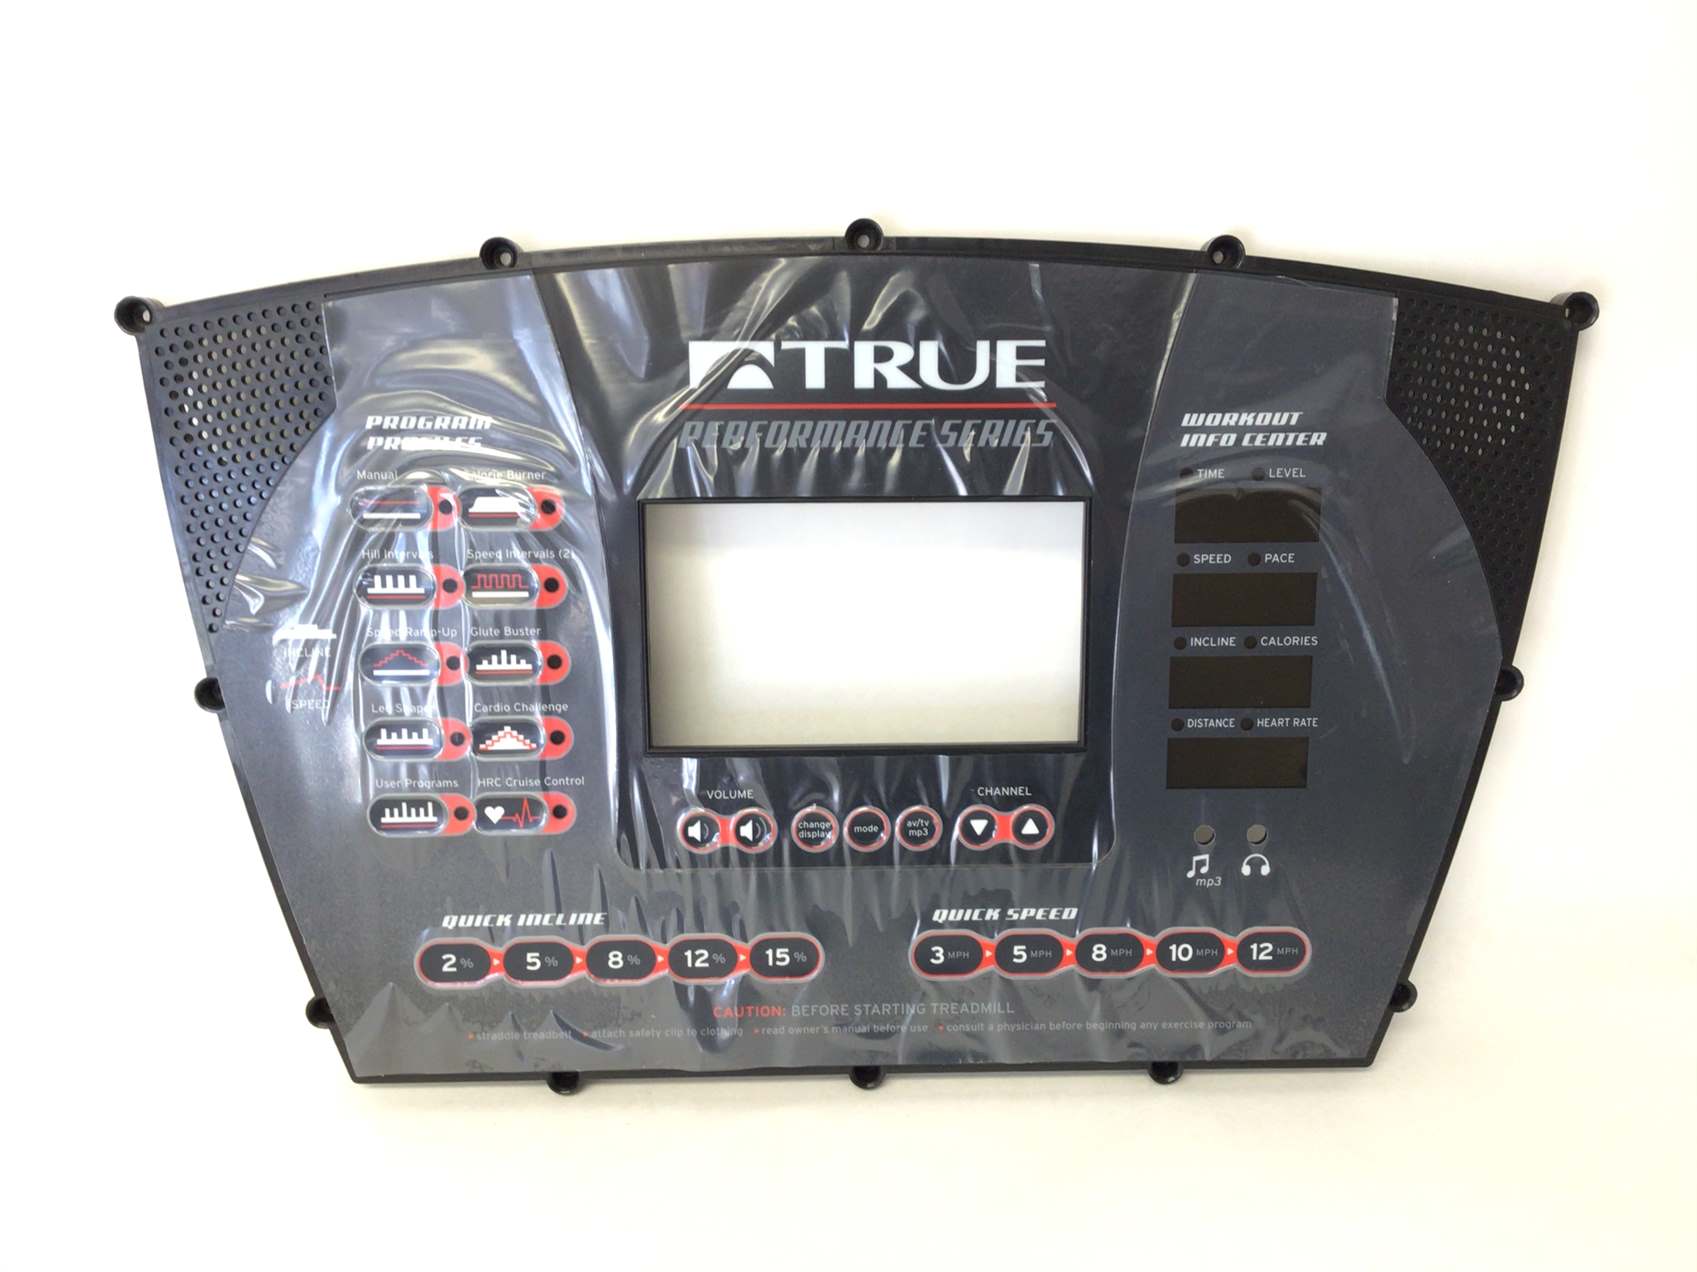 True Fitness 500 700 PS Performance Series Display Console Overlay